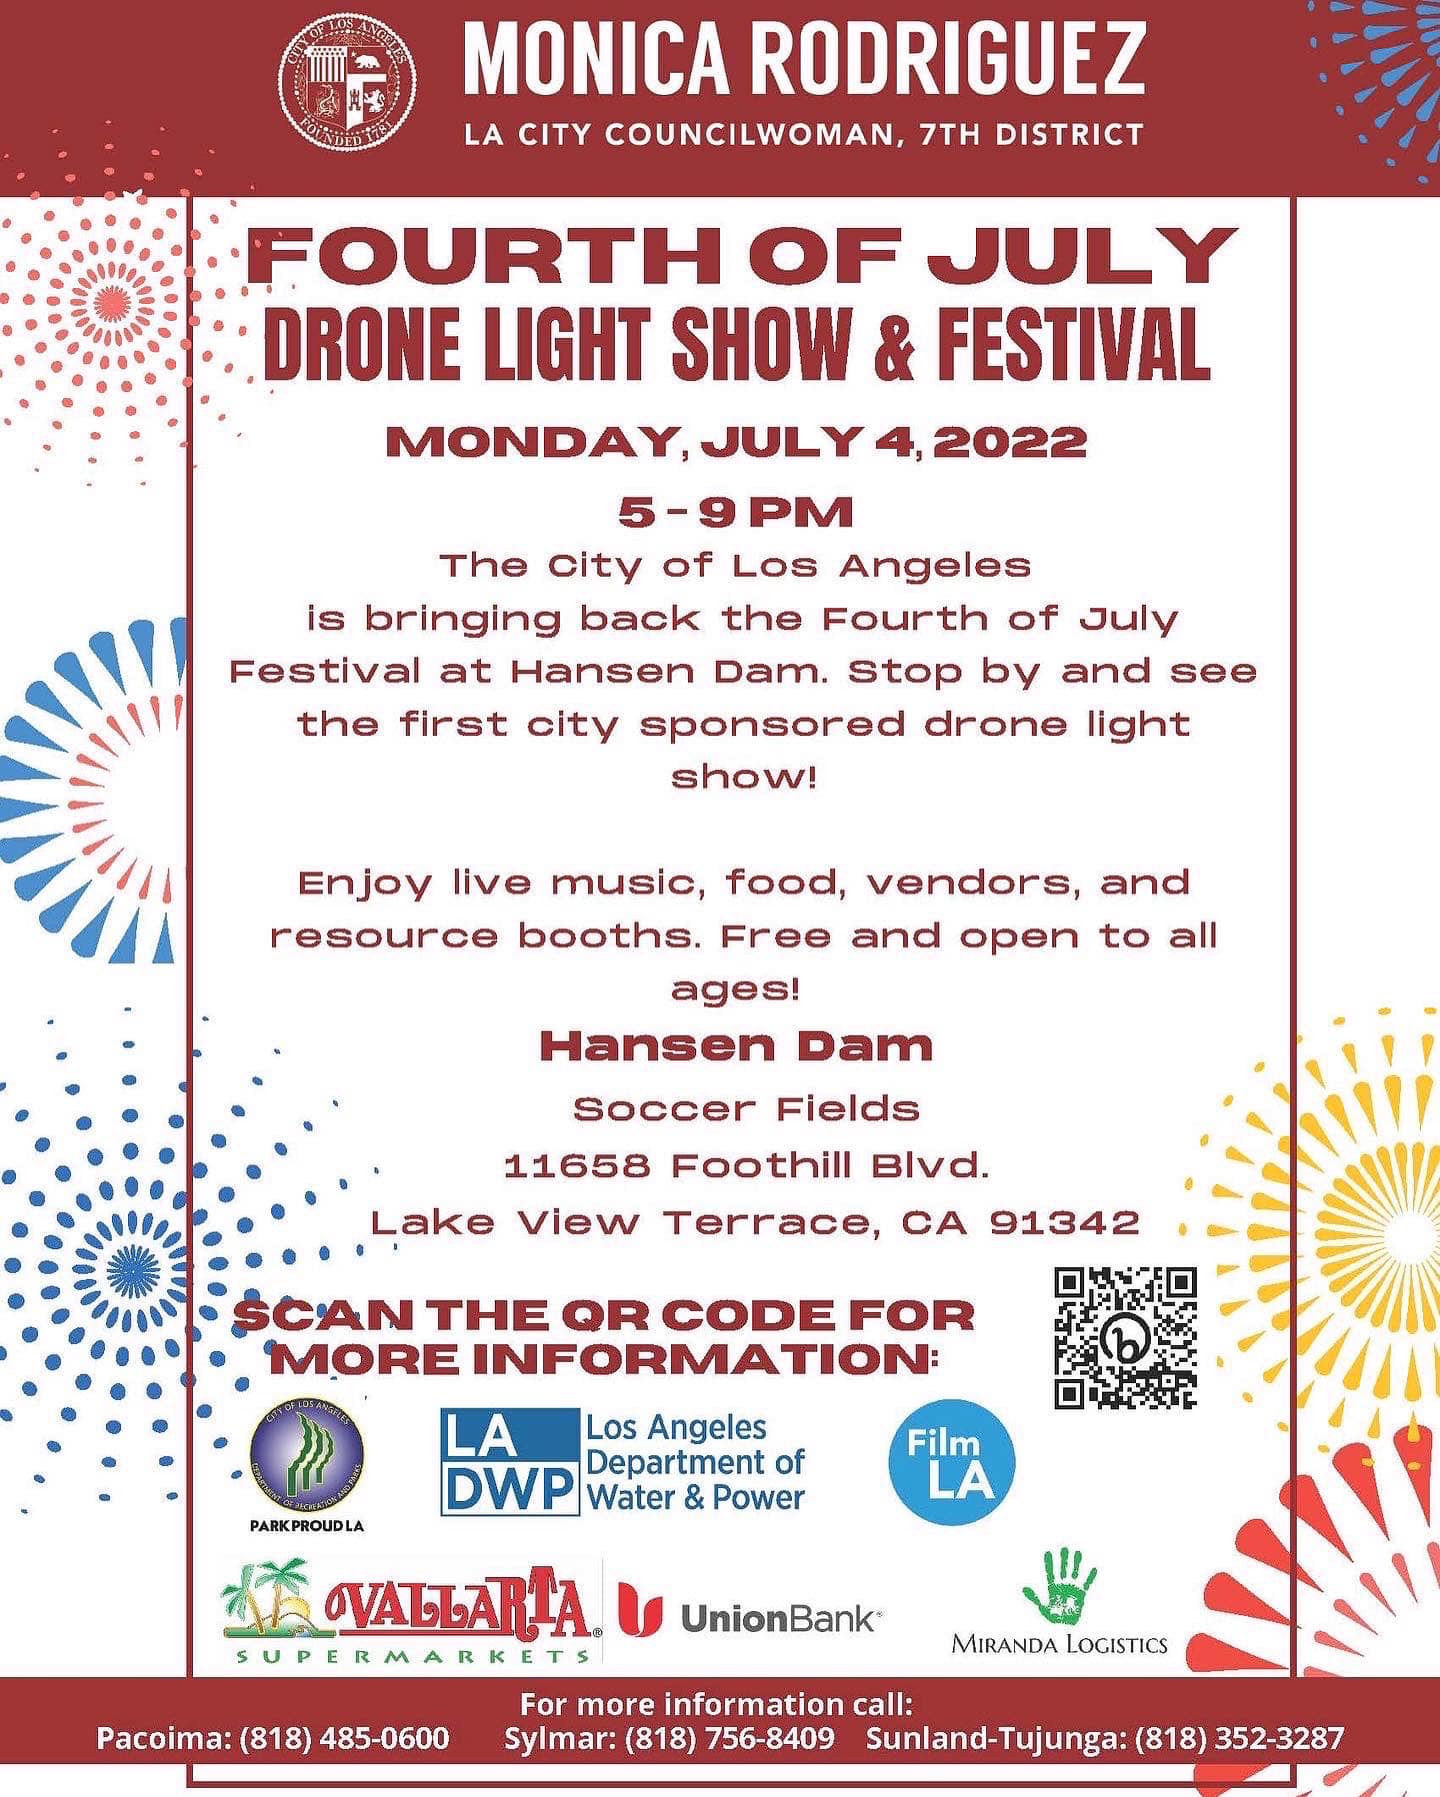 Join us for the Fourth of July Celebration